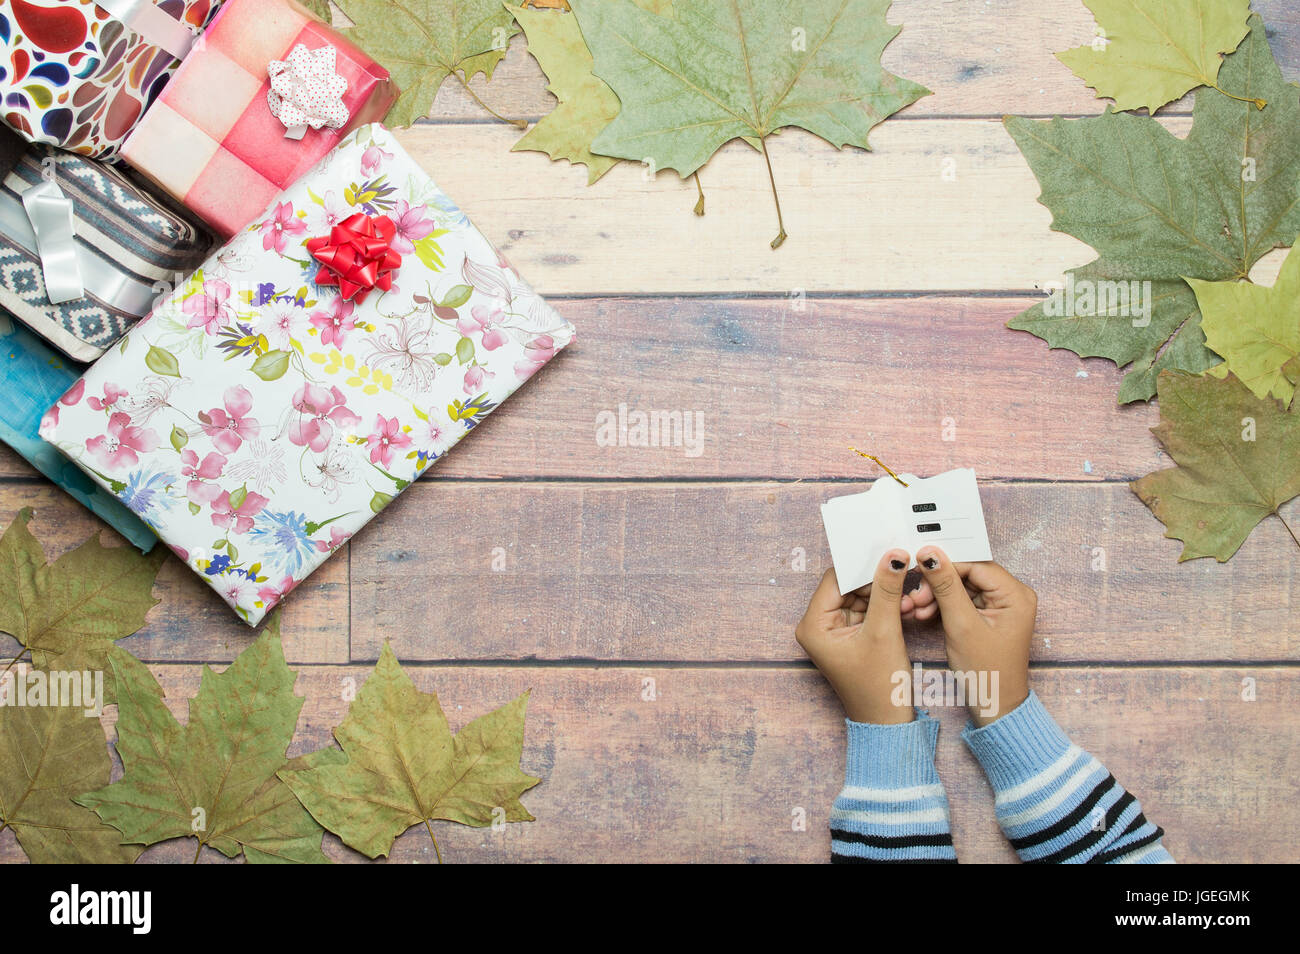 hands of girl opening gift card on wooden table with autumn leaves Stock Photo